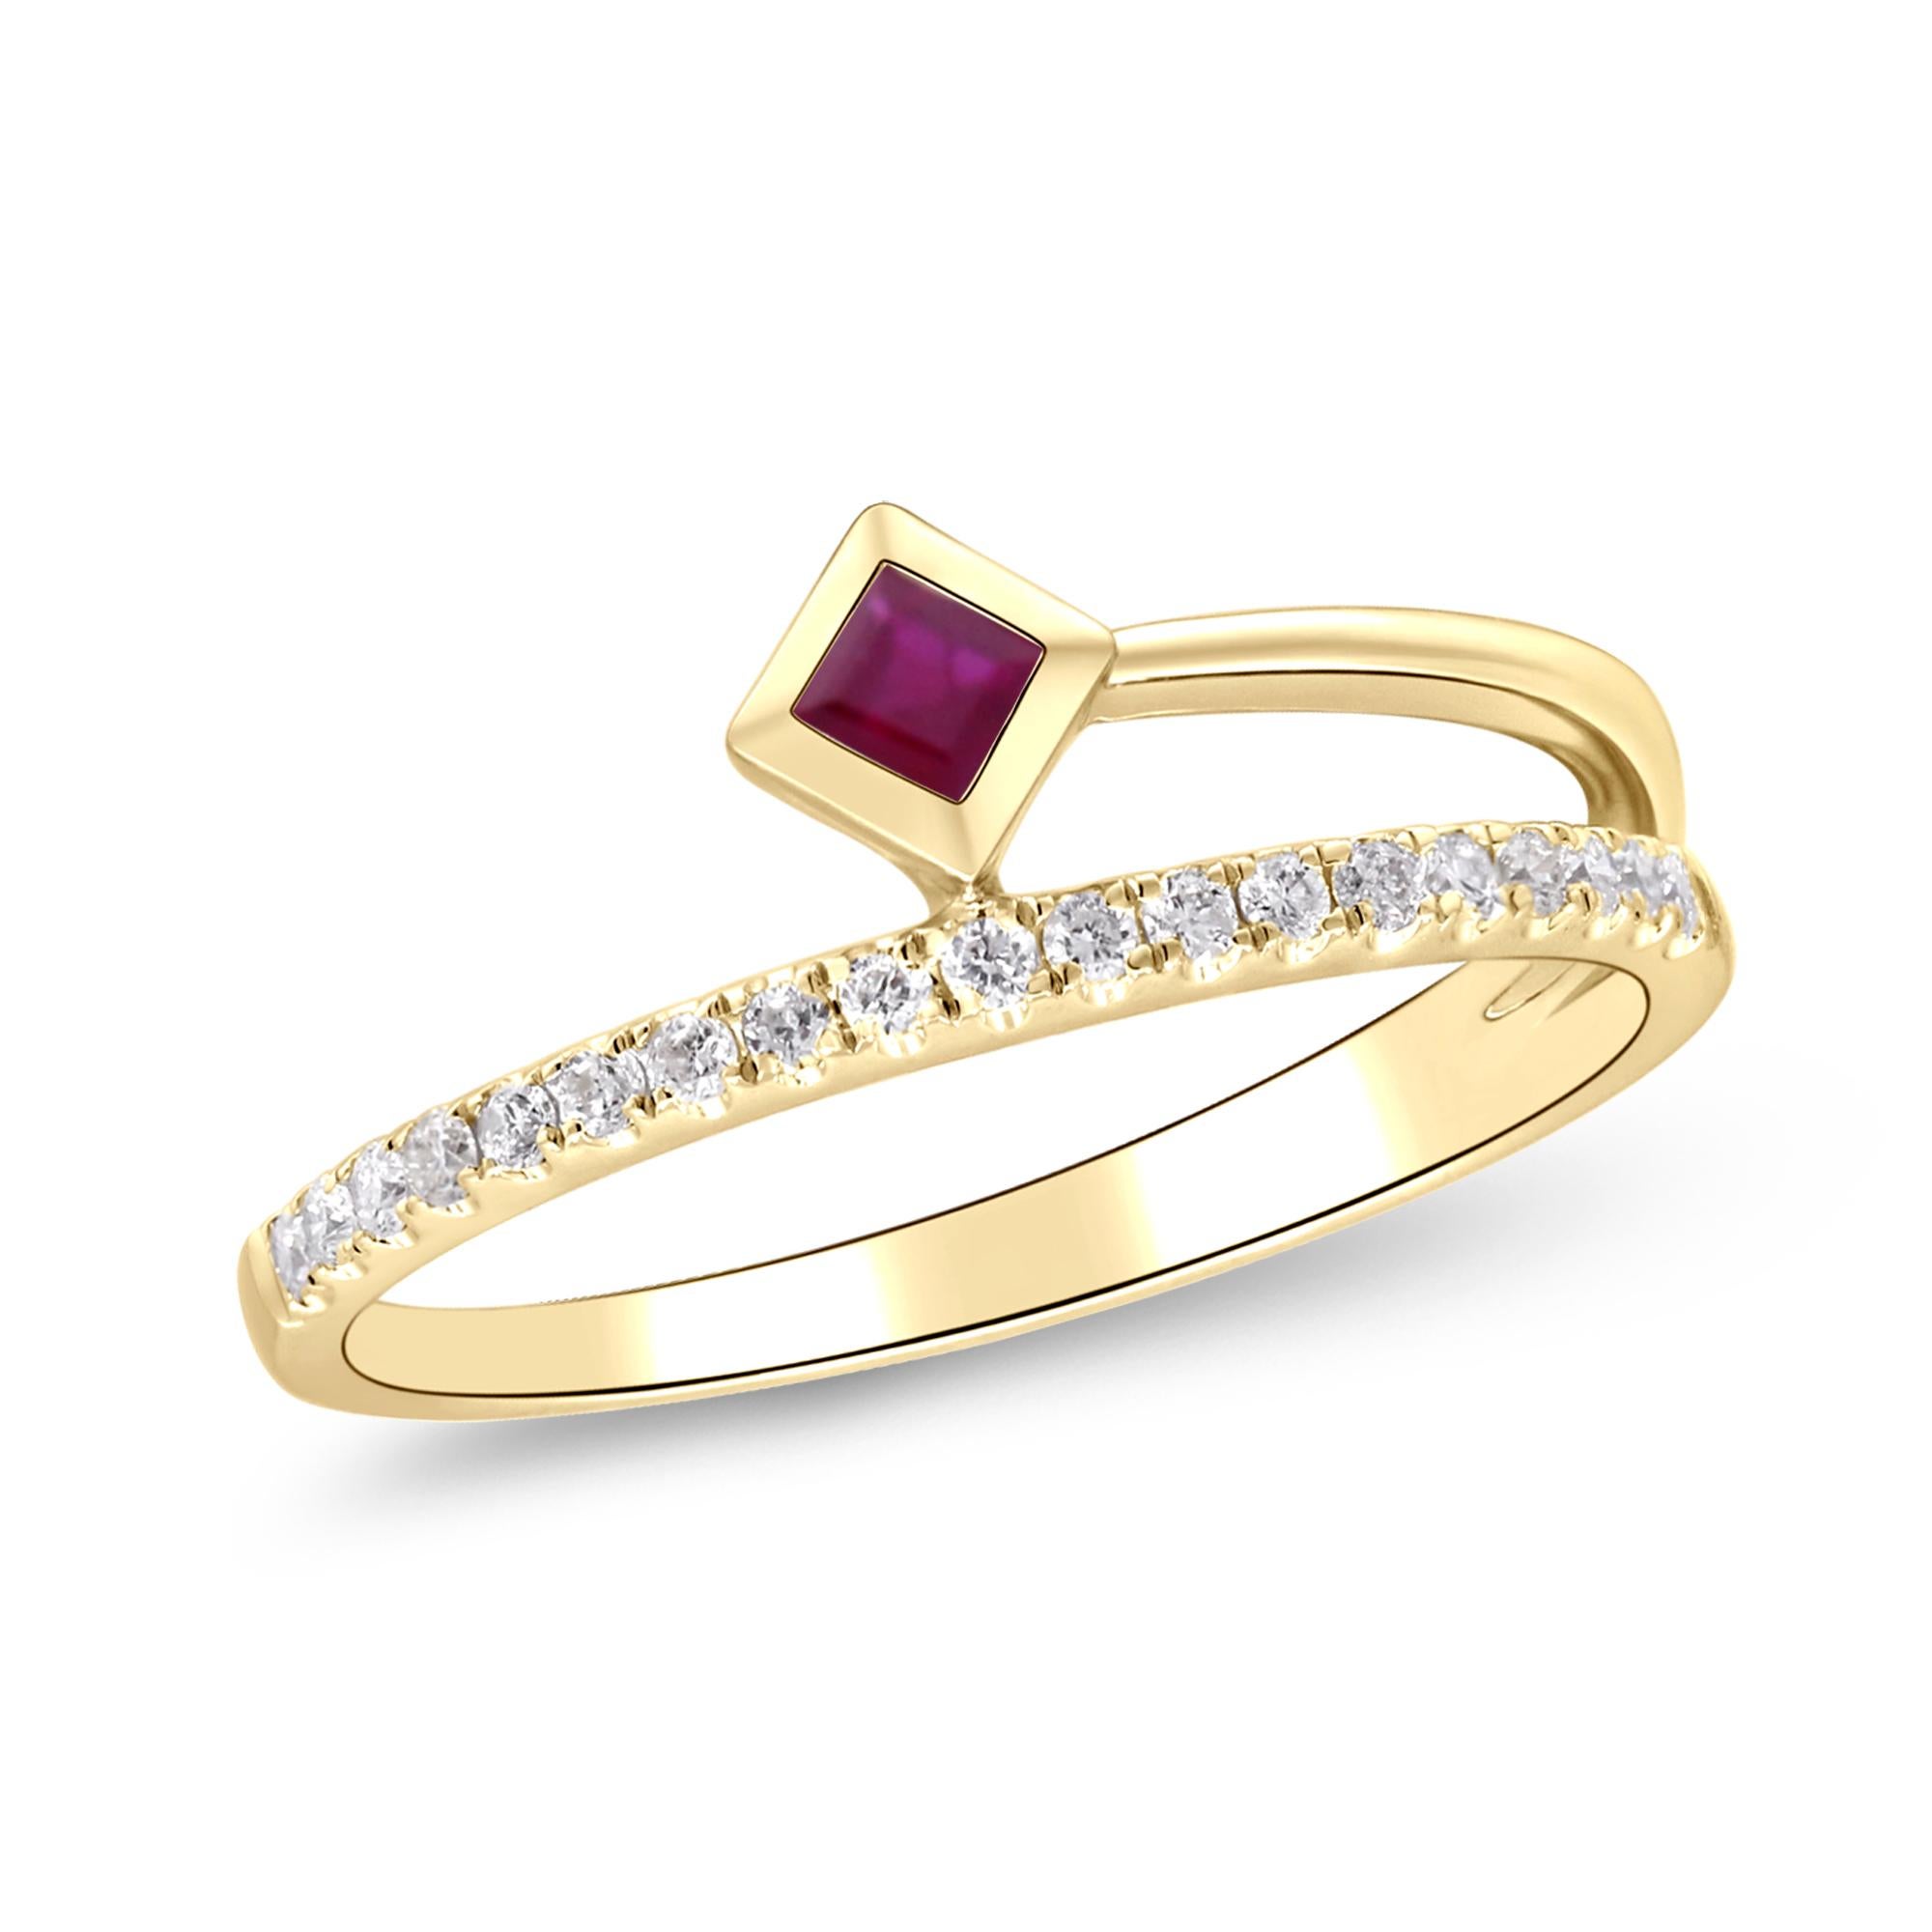 Art Deco 0.12 Carat Square-Cut Ruby With Diamond Accents 14K Yellow Gold Ring